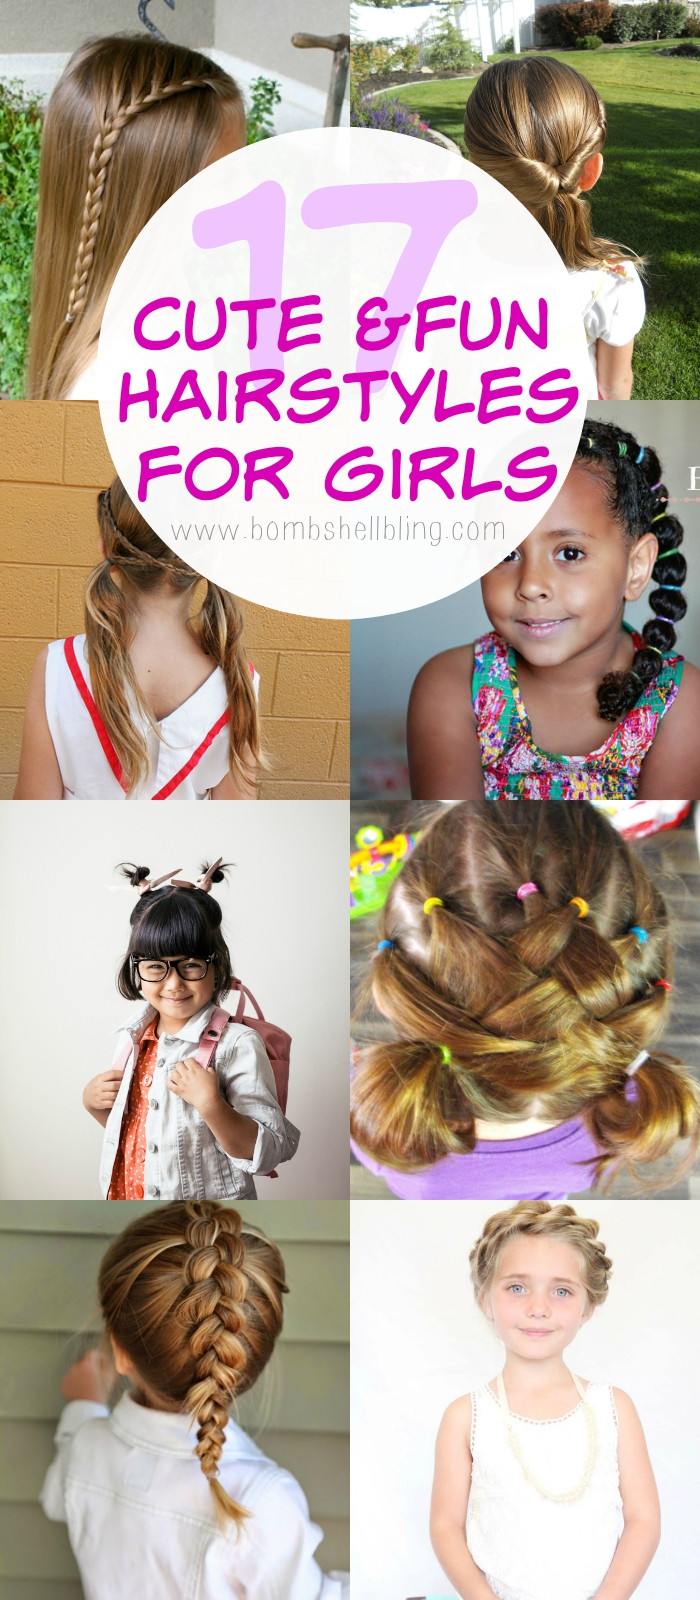 Fun Little Girl Hairstyles
 Hairstyles for Girls 17 Simple and Fun Back to School Ideas